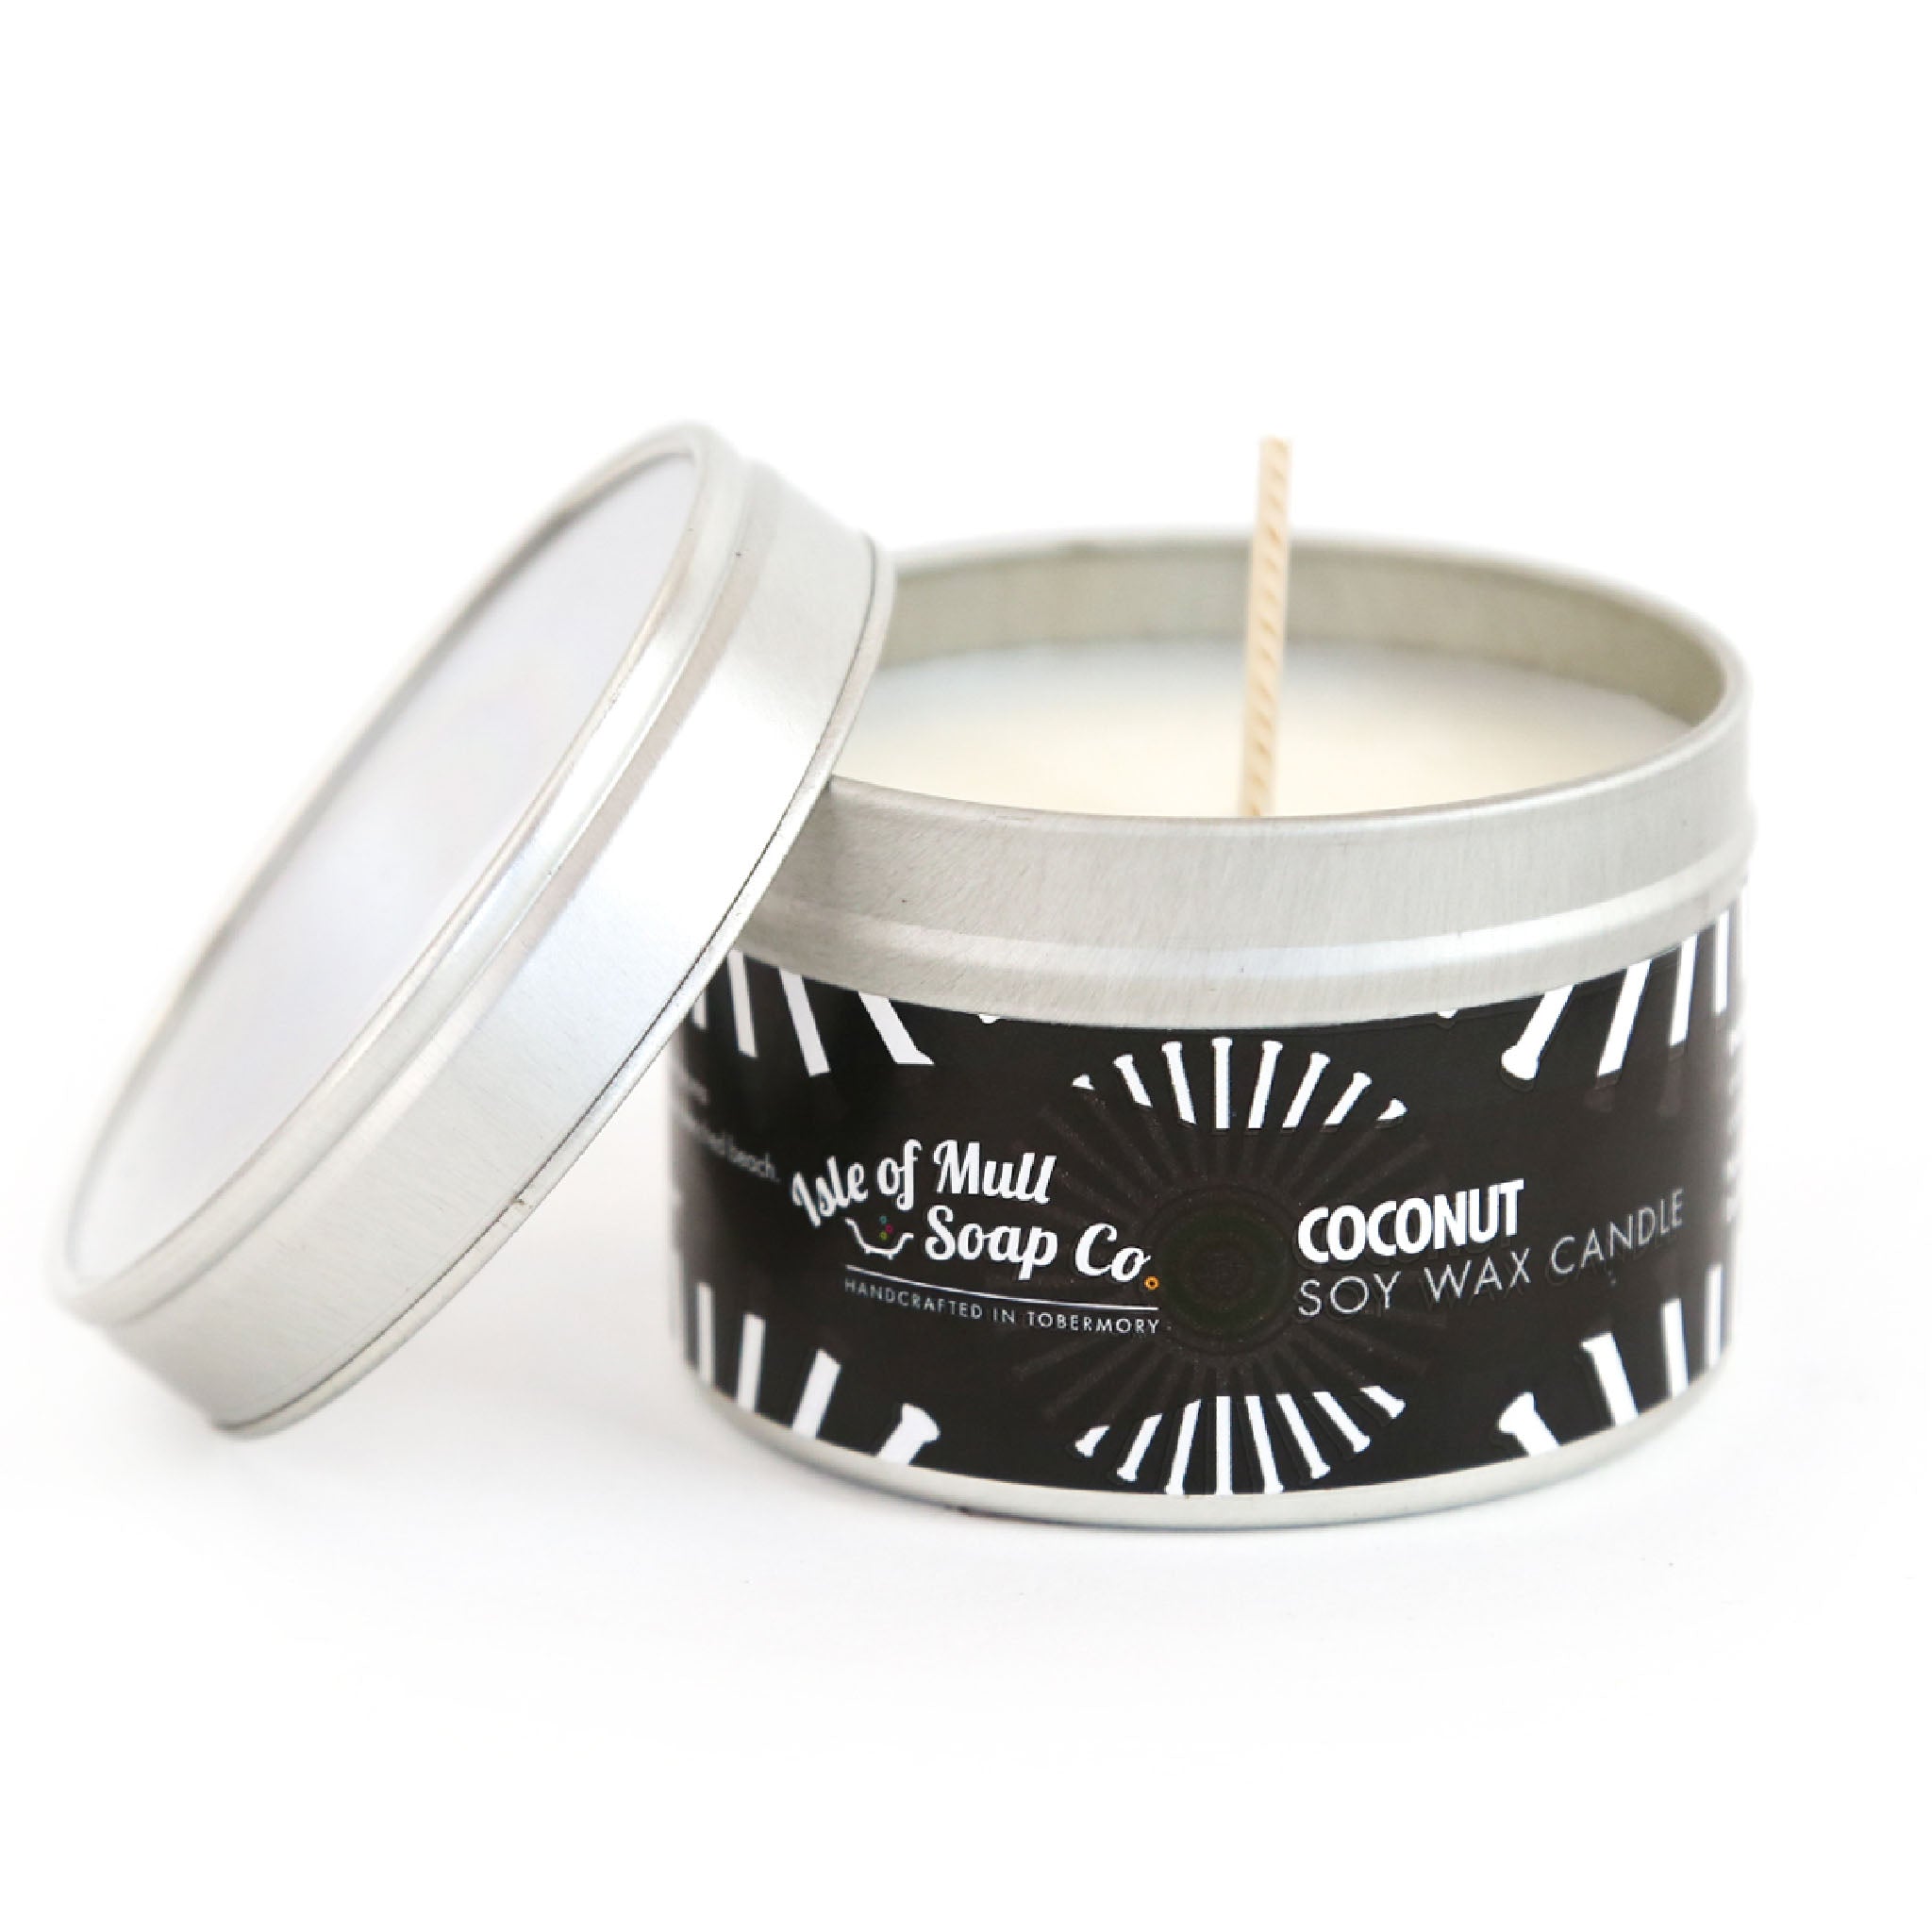 Coconut Isle of Mull Candle